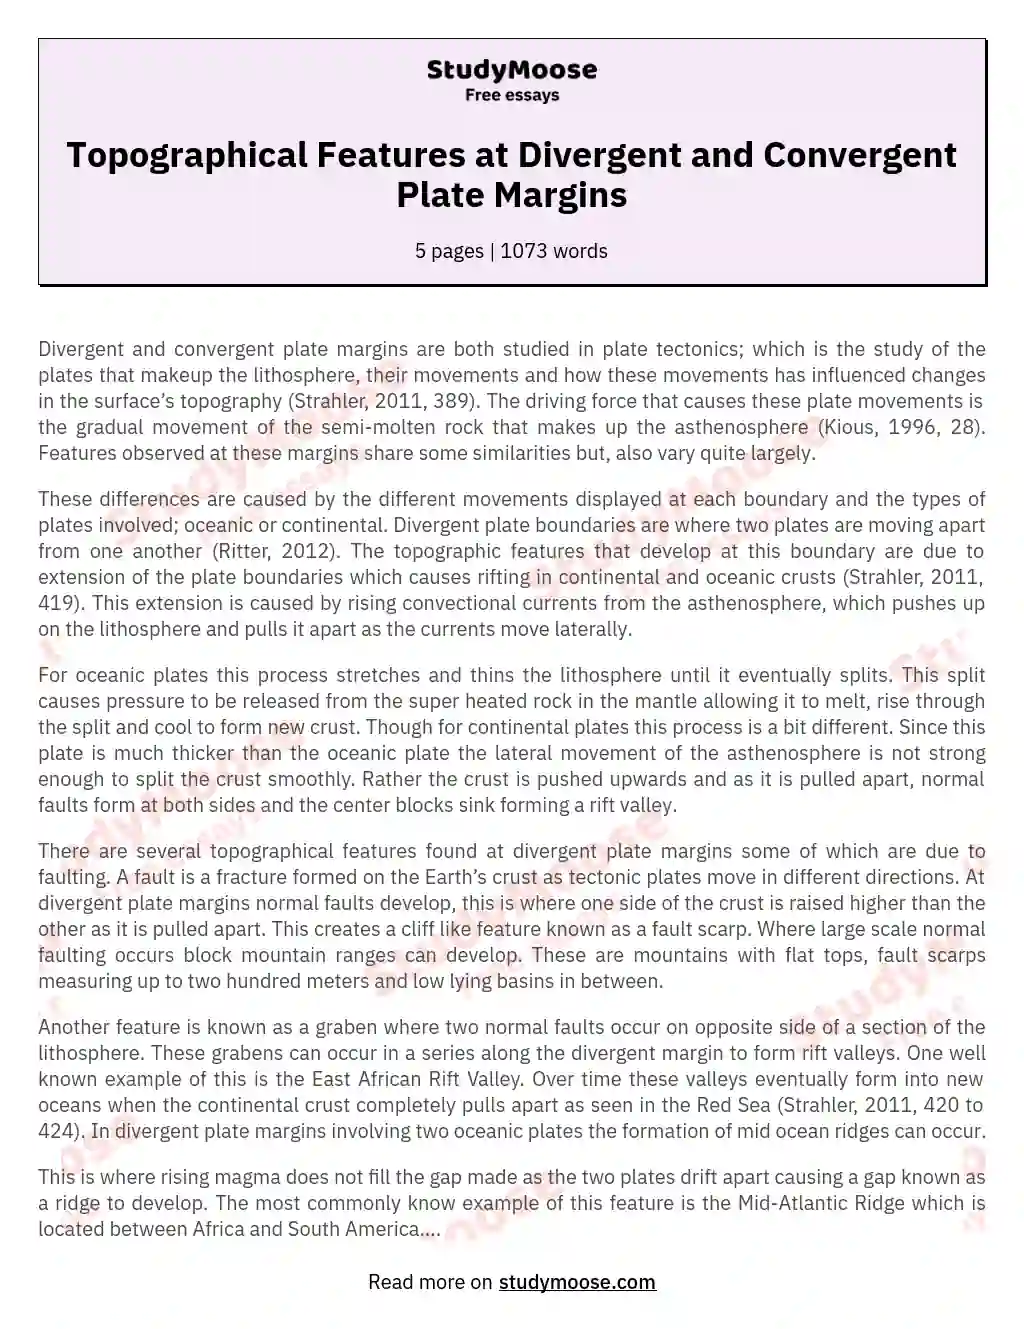 Topographical Features at Divergent and Convergent Plate Margins essay